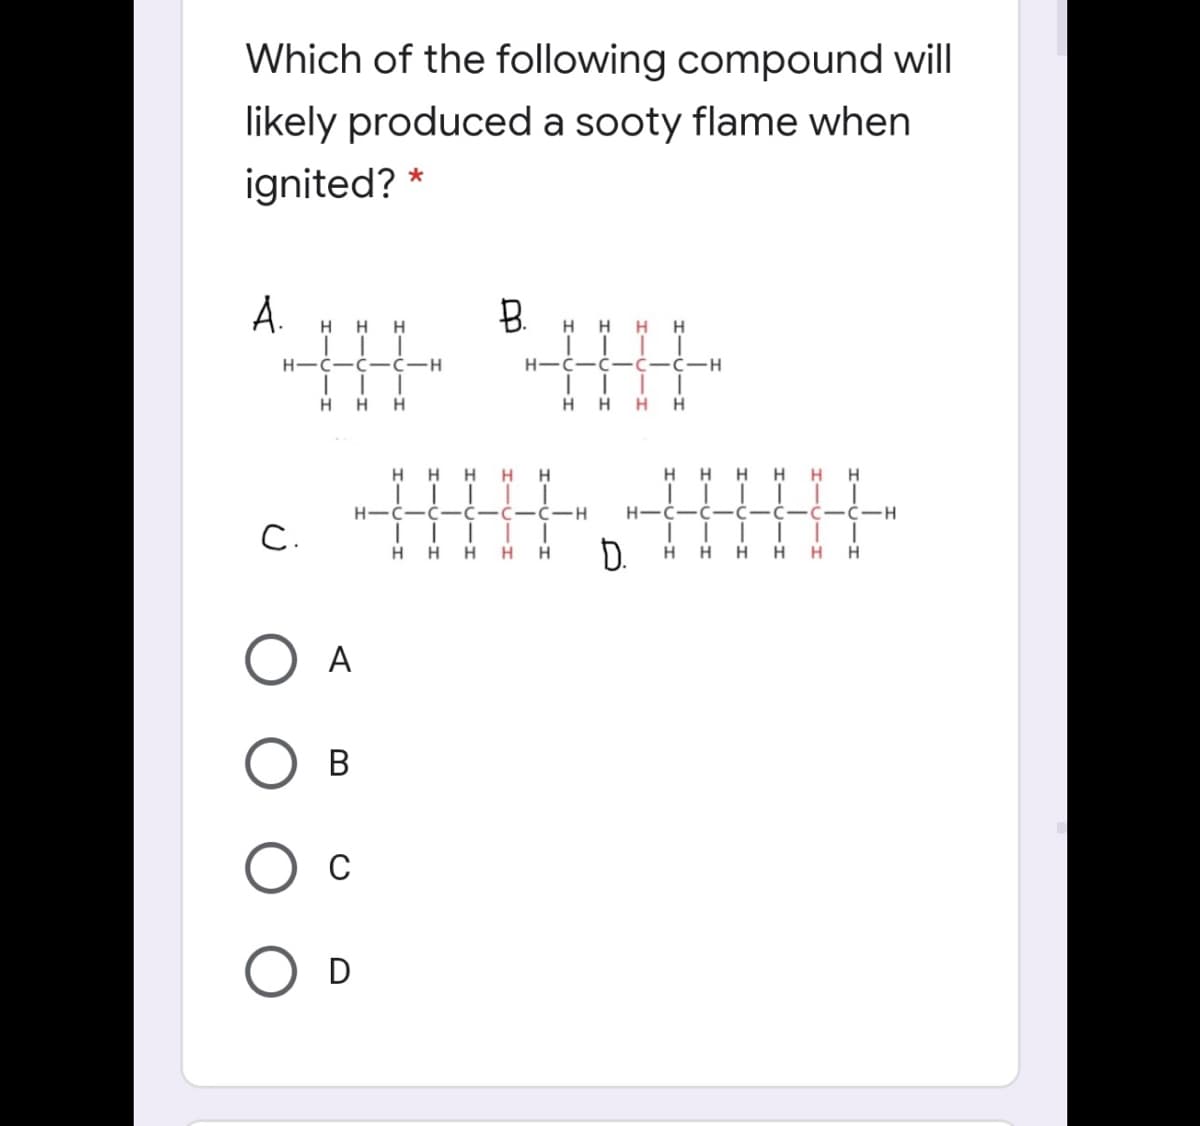 Which of the following compound will
likely produced a sooty flame when
ignited? *
A.
B.
H H
H
H
H
H
H
H-Ć-Ć- Ċ-H
C-C-C-H
H
H.
H.
H H
H
H
H
H
H
H
H
H H
H-C
C-C-H
H.
C-H
C.
D.
H
H.
H
H.
H
H
H
A
В
C
